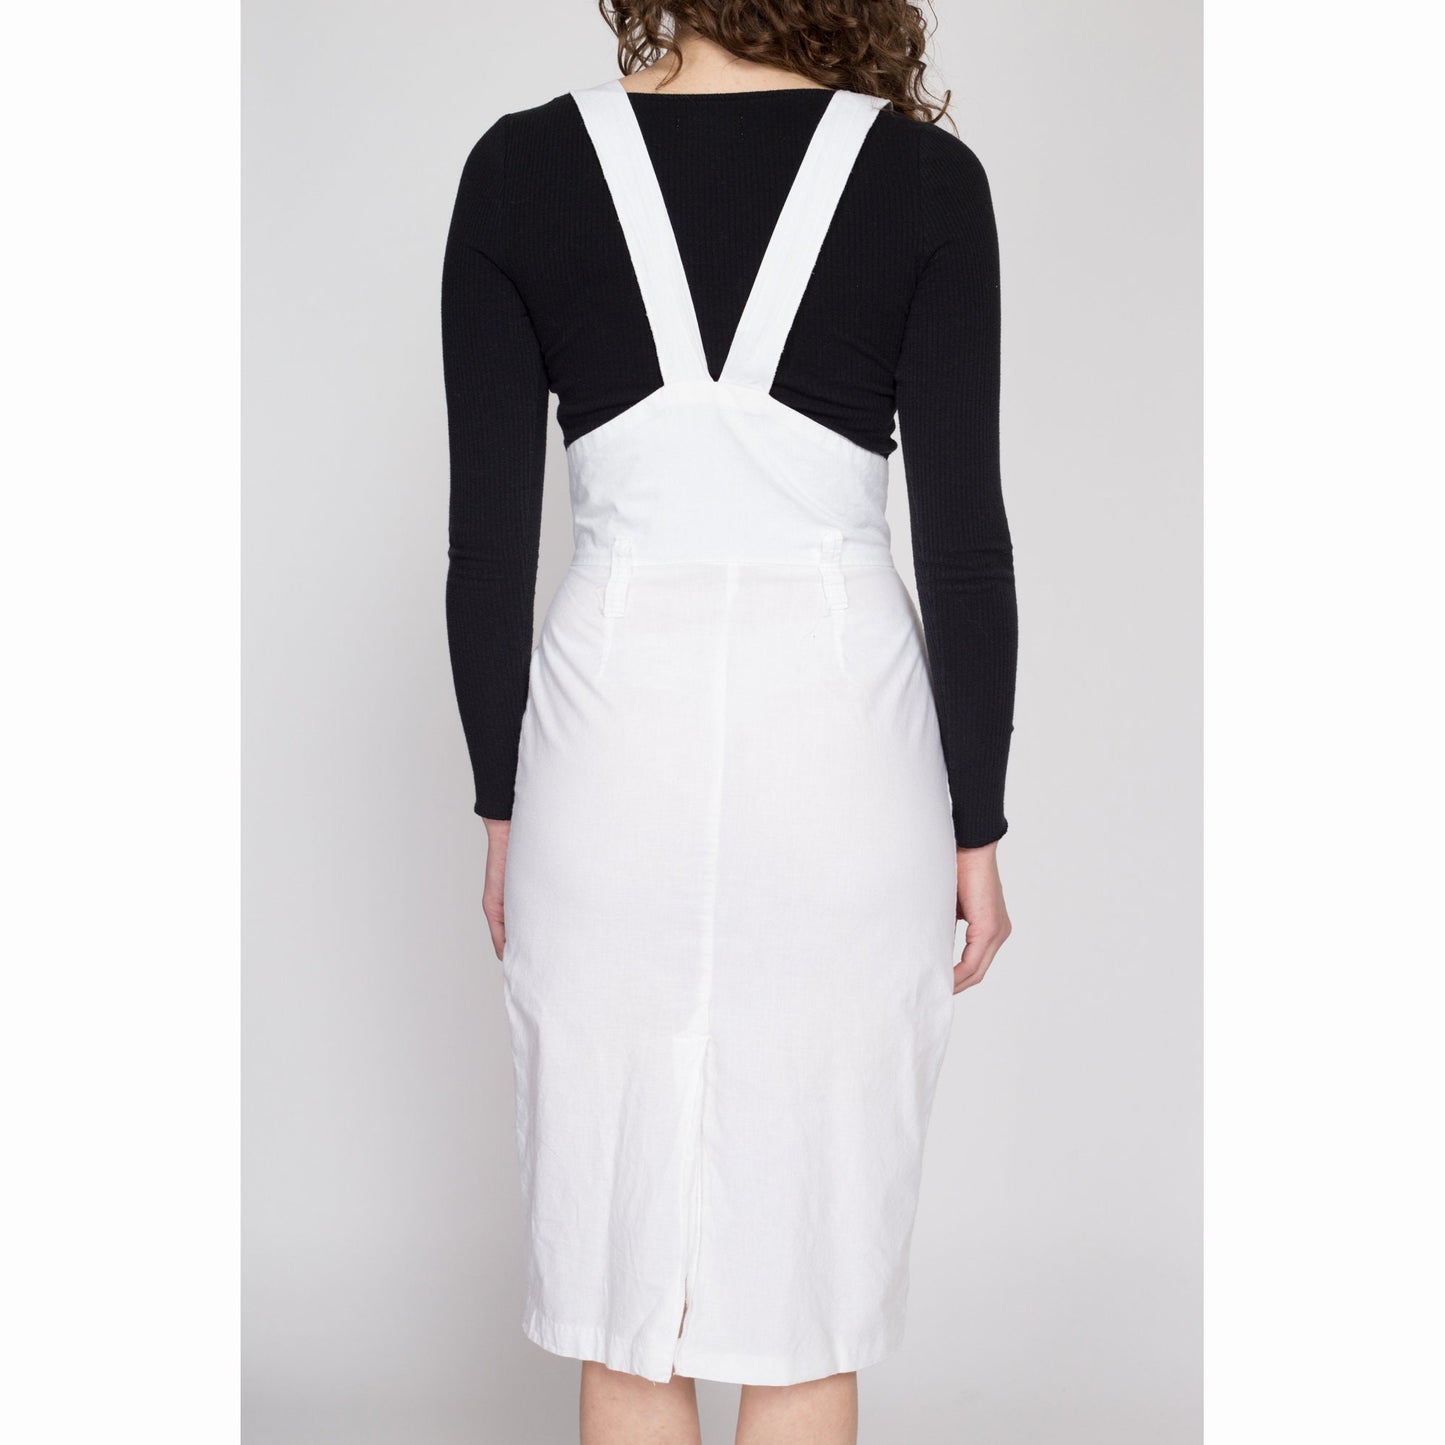 Small 80s White Pinafore Suspender Dress | Vintage Cotton Button Up Fitted Midi Dress